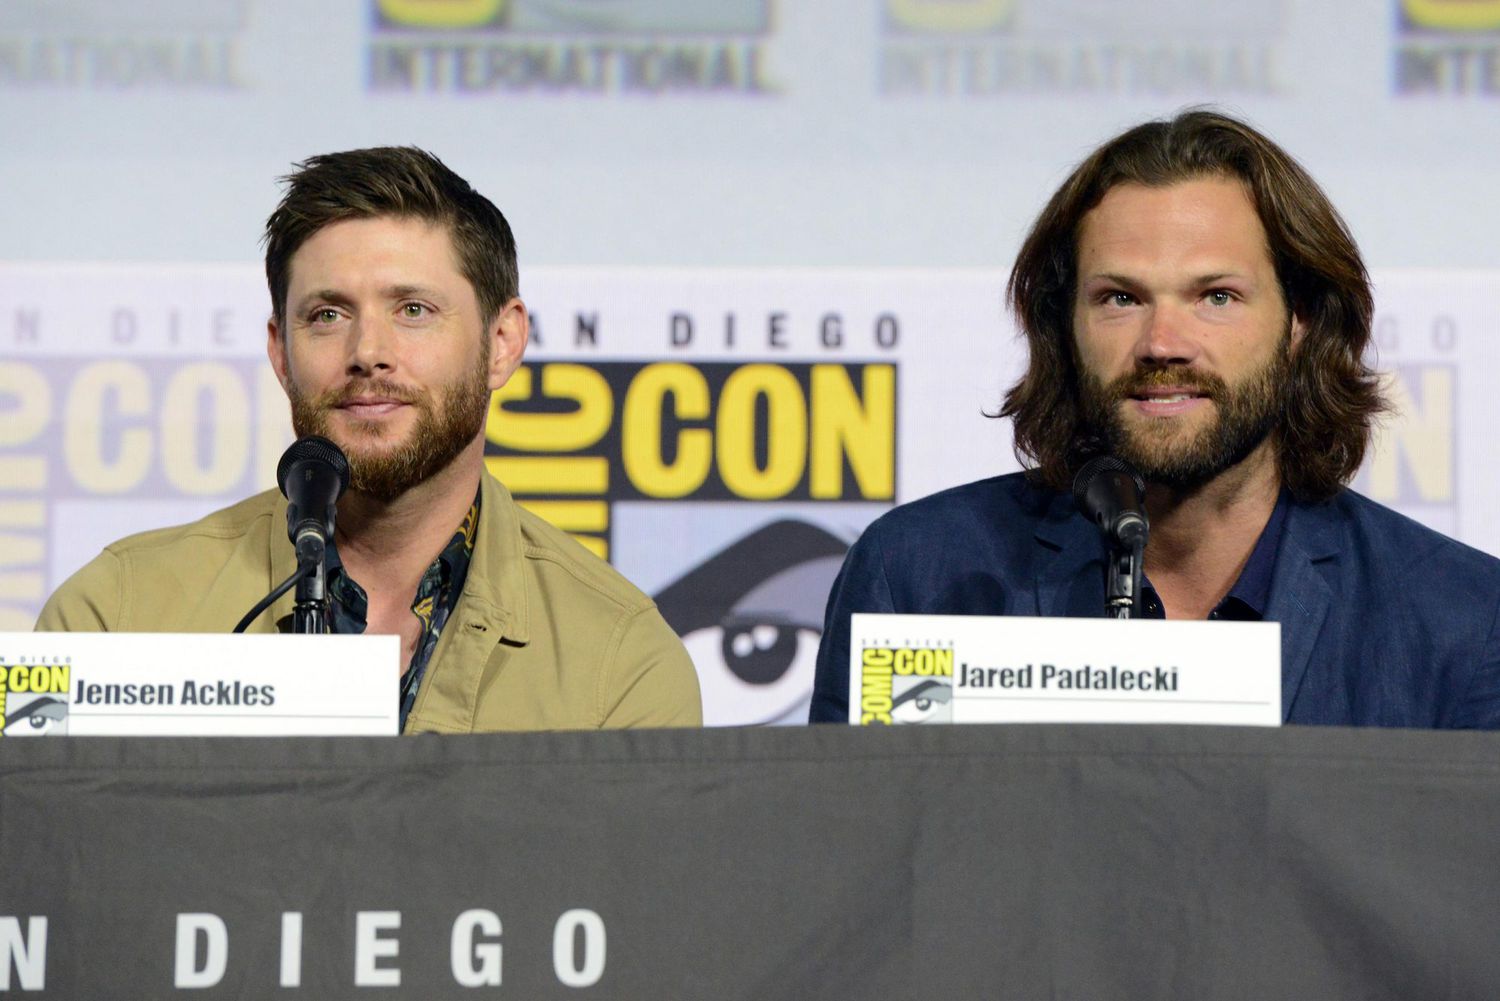 2019 Comic-Con International - "Supernatural" Special Video Presentation And Q&A